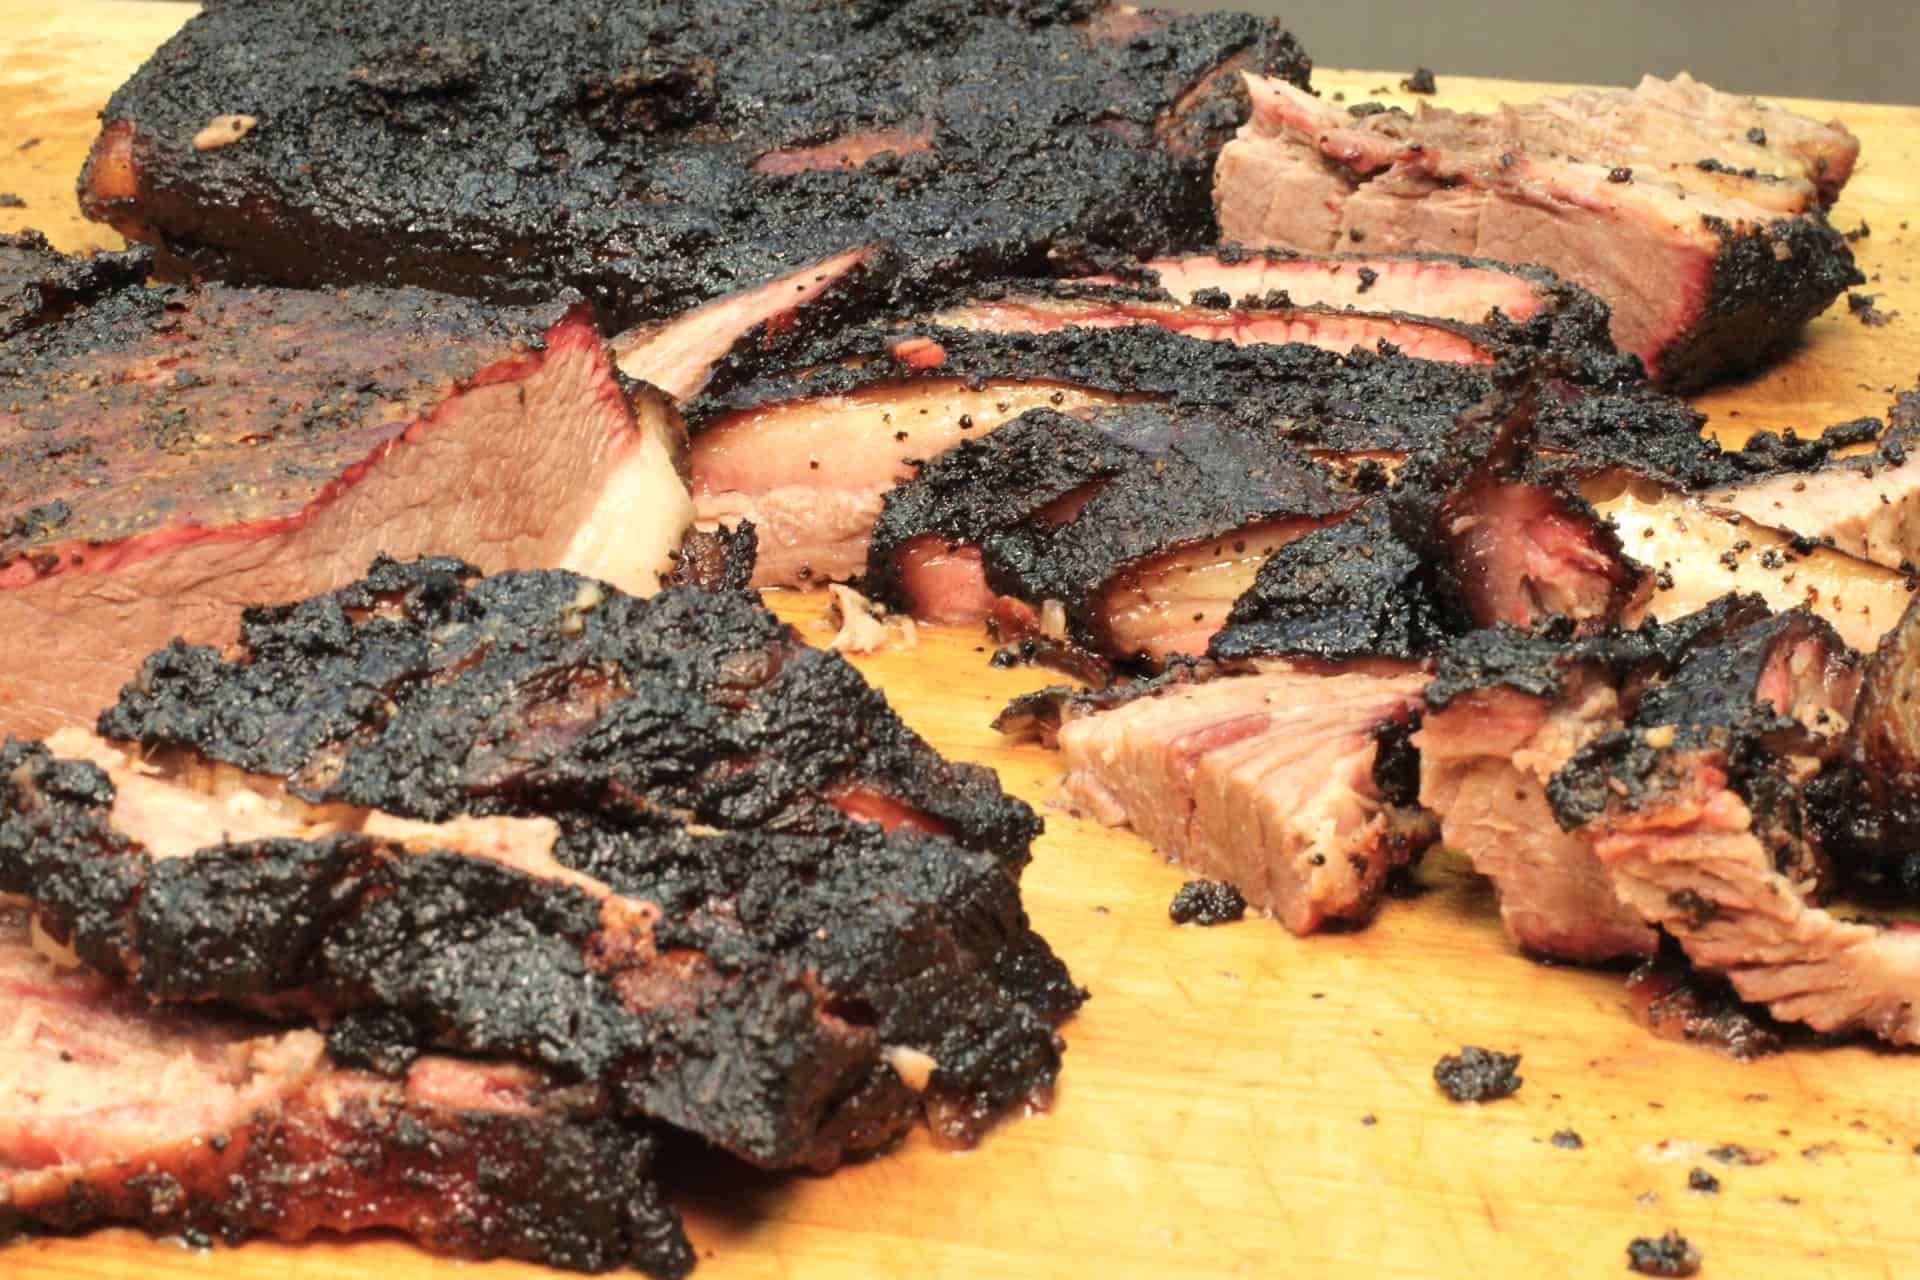 SmokeBrisket edit1 - Brisket Tips from the Chef Who Wrote the Book!